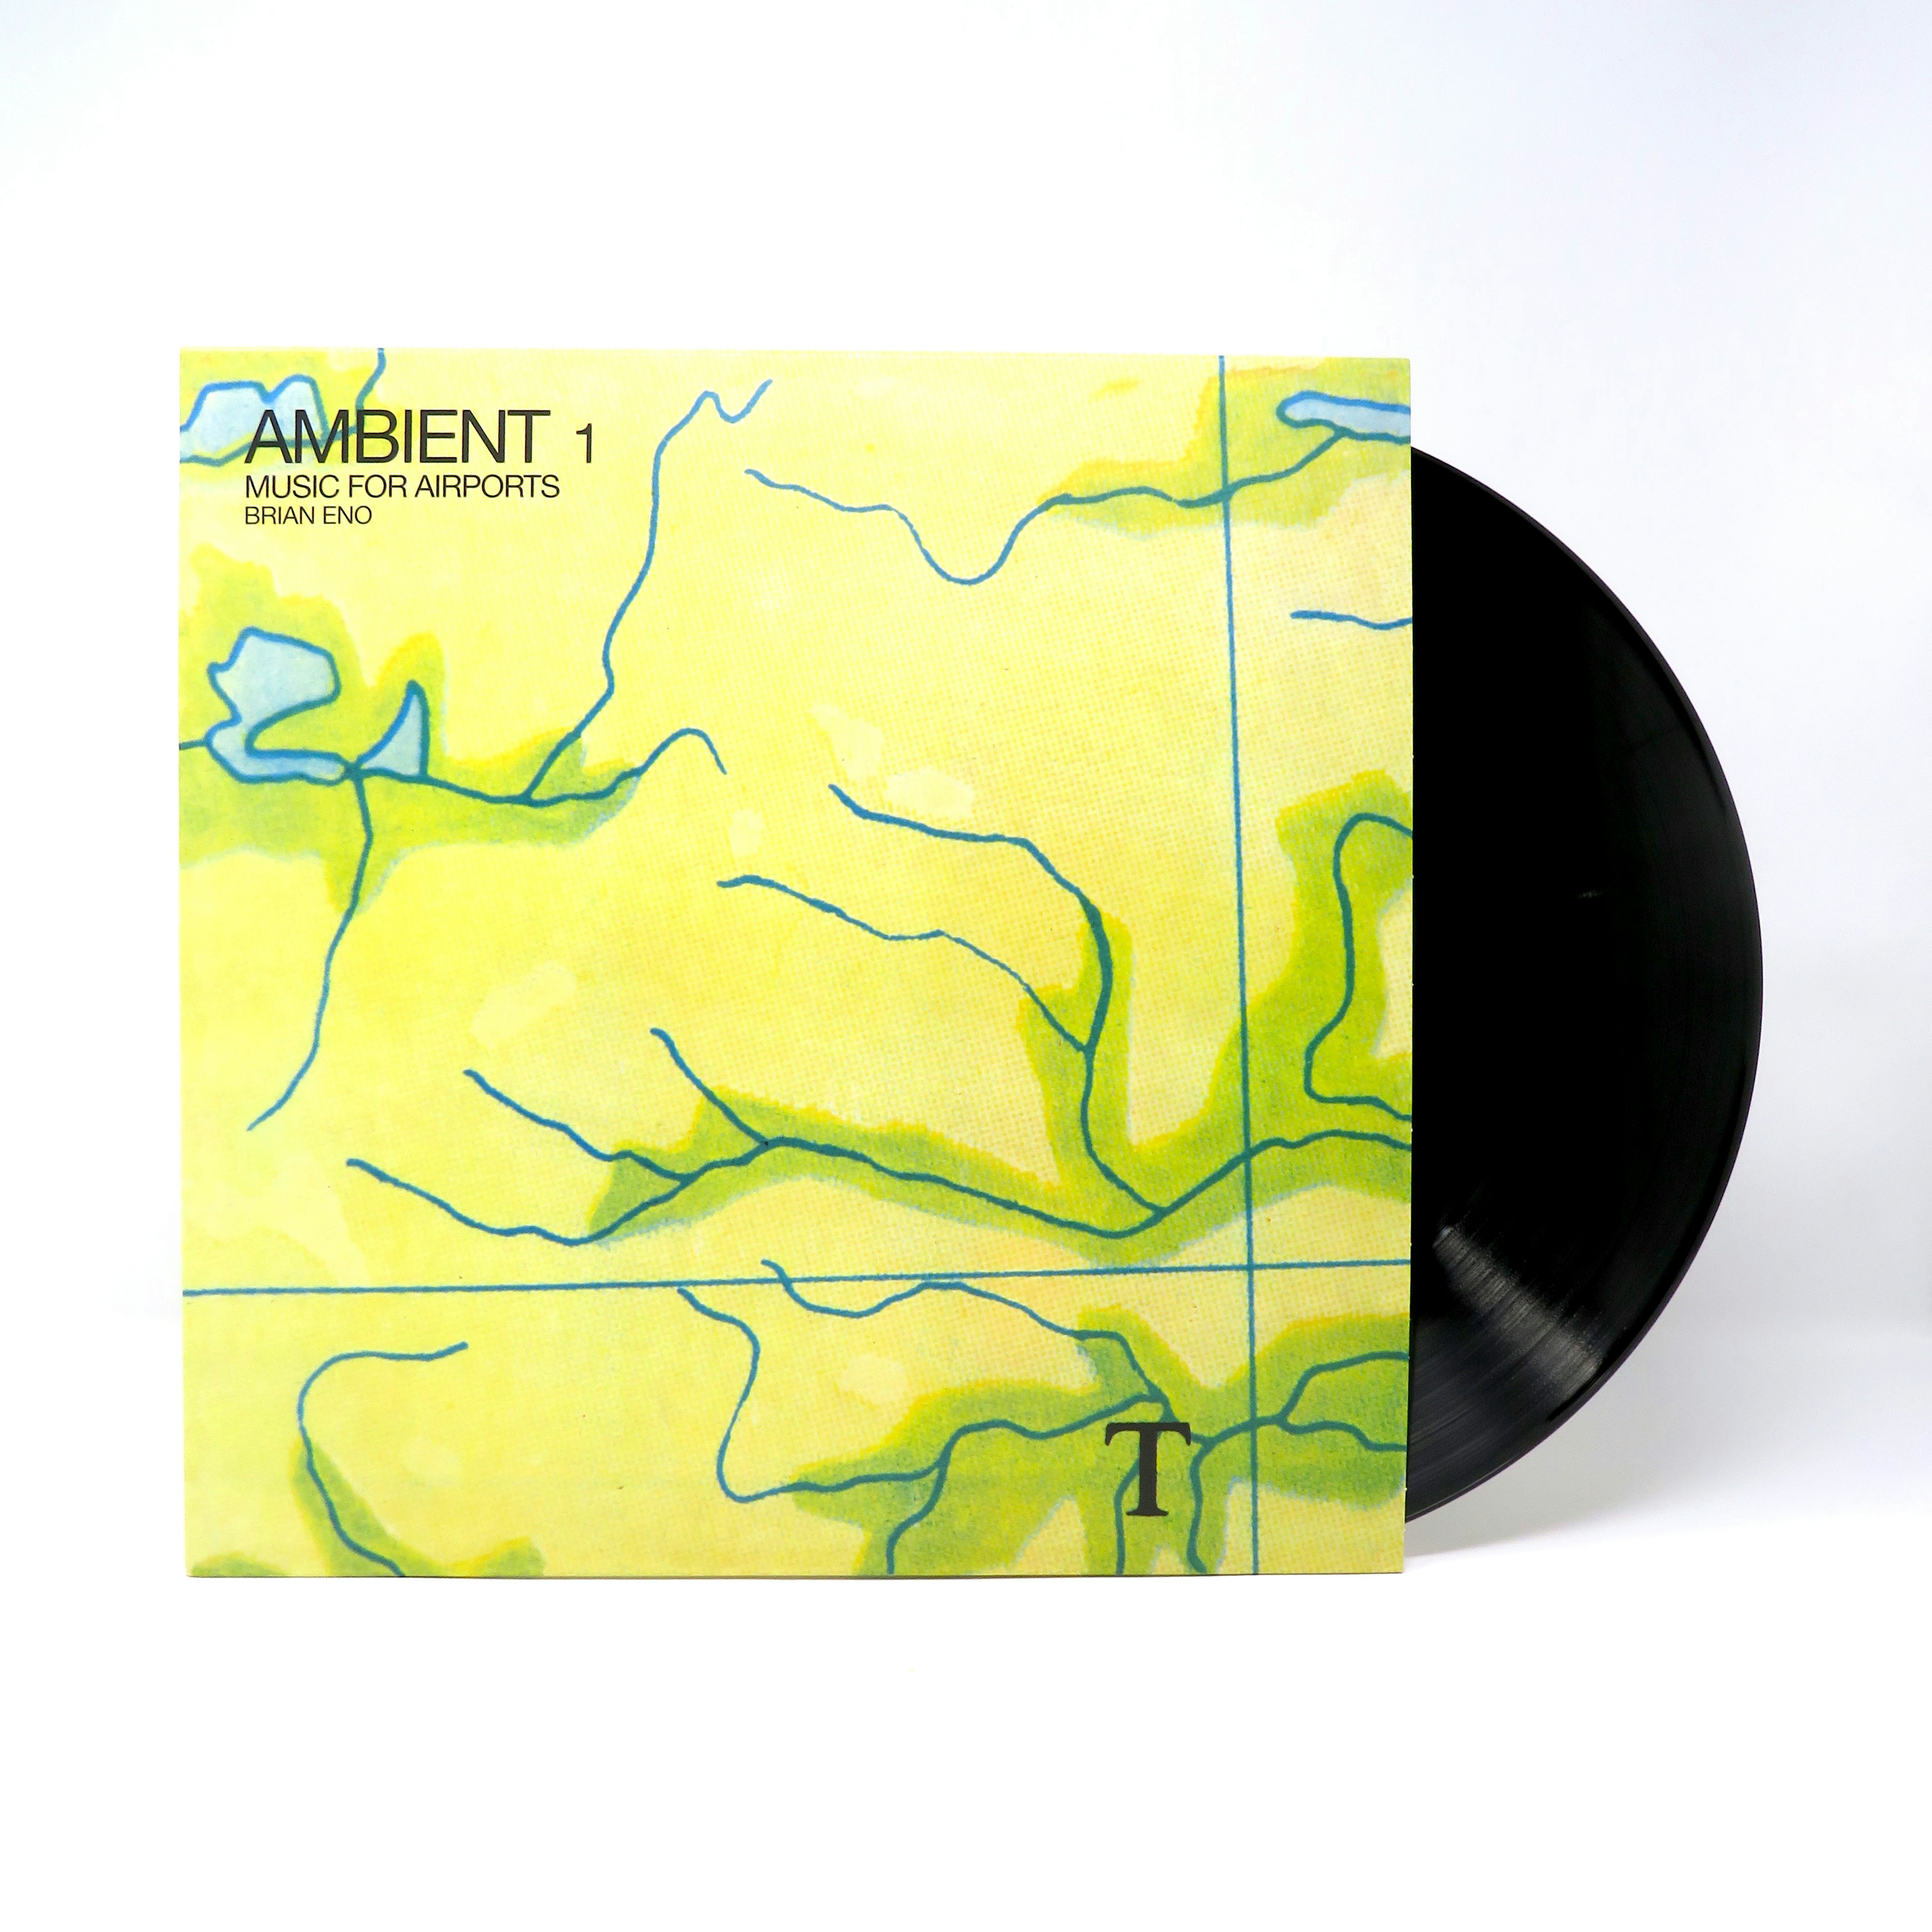 Album artwork for Ambient 1 - Music For Airports by Brian Eno